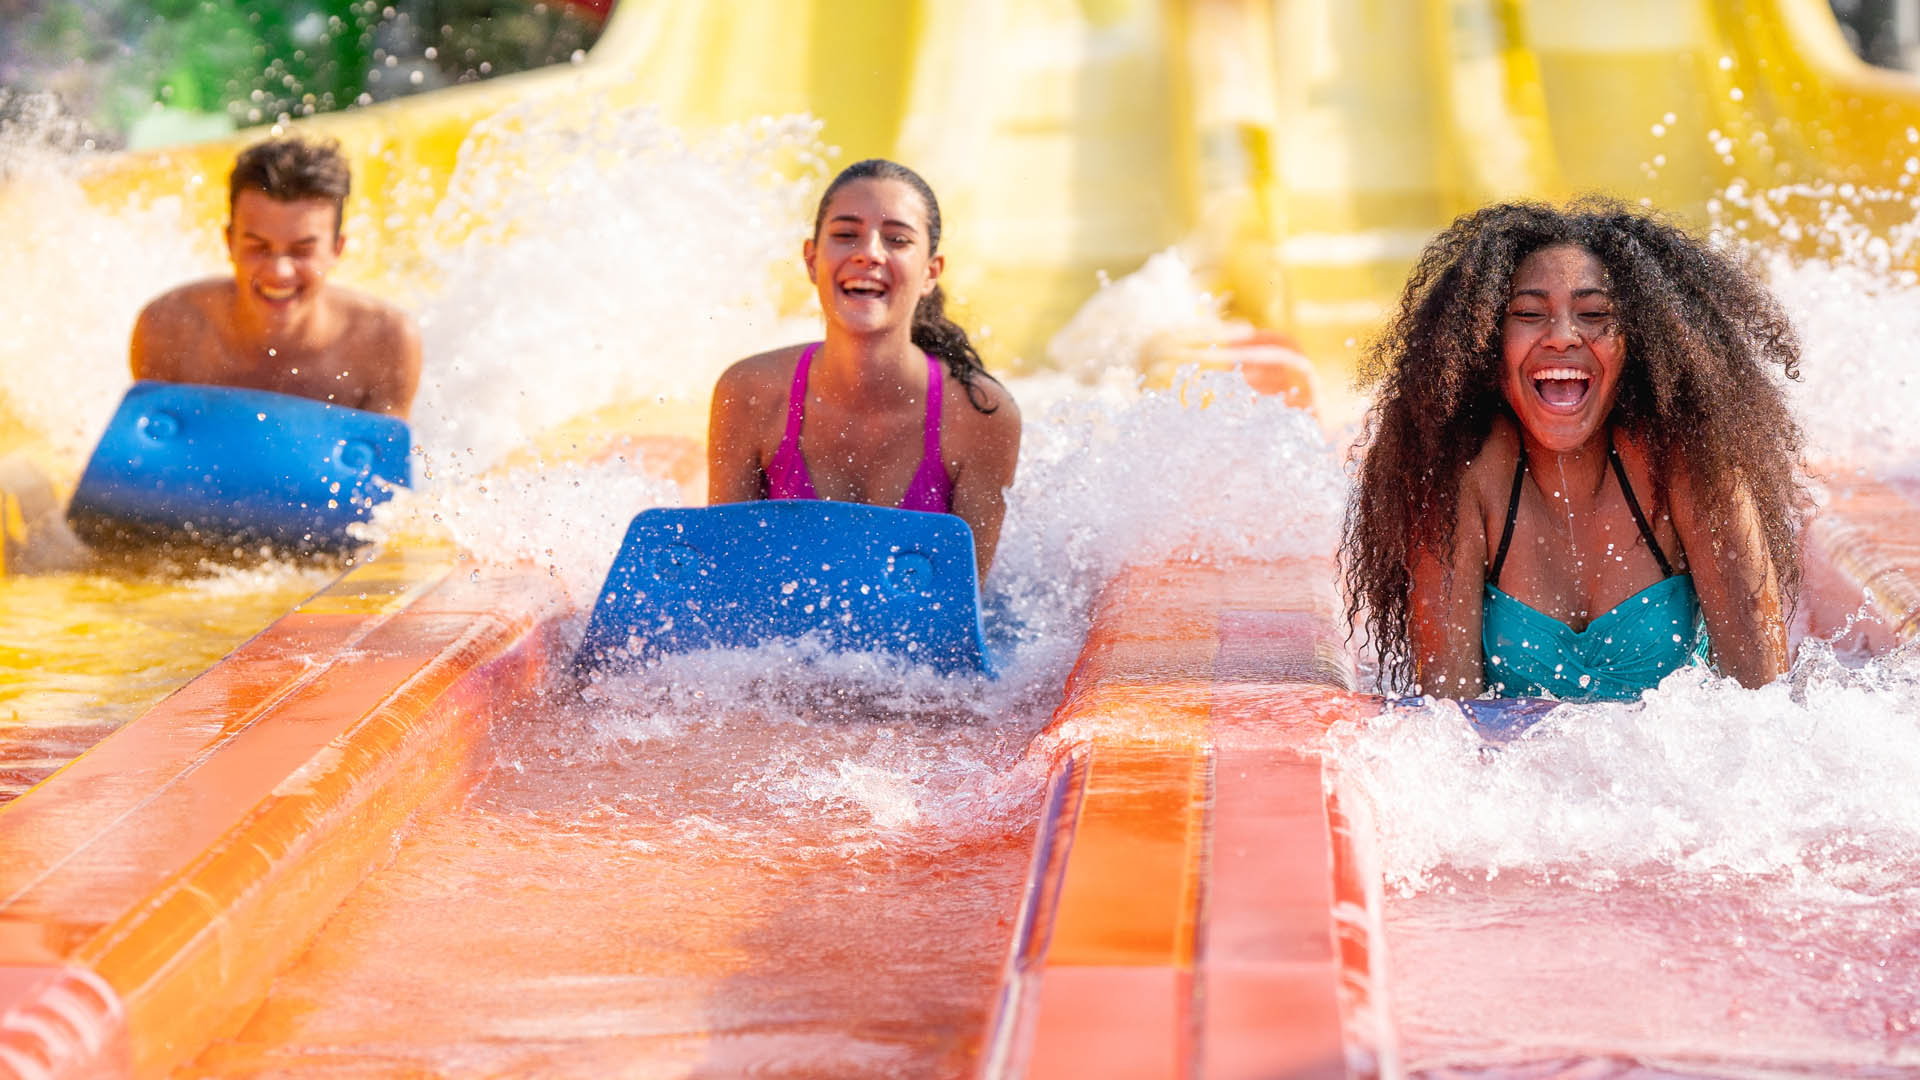 Wet’n Wild Emerald Pointe, the Carolinas' favorite water park, features over 38 slides & attractions with thrills for ALL ages! Get ready to step up to the park’s new dual-drop thriller, Bombs Away.